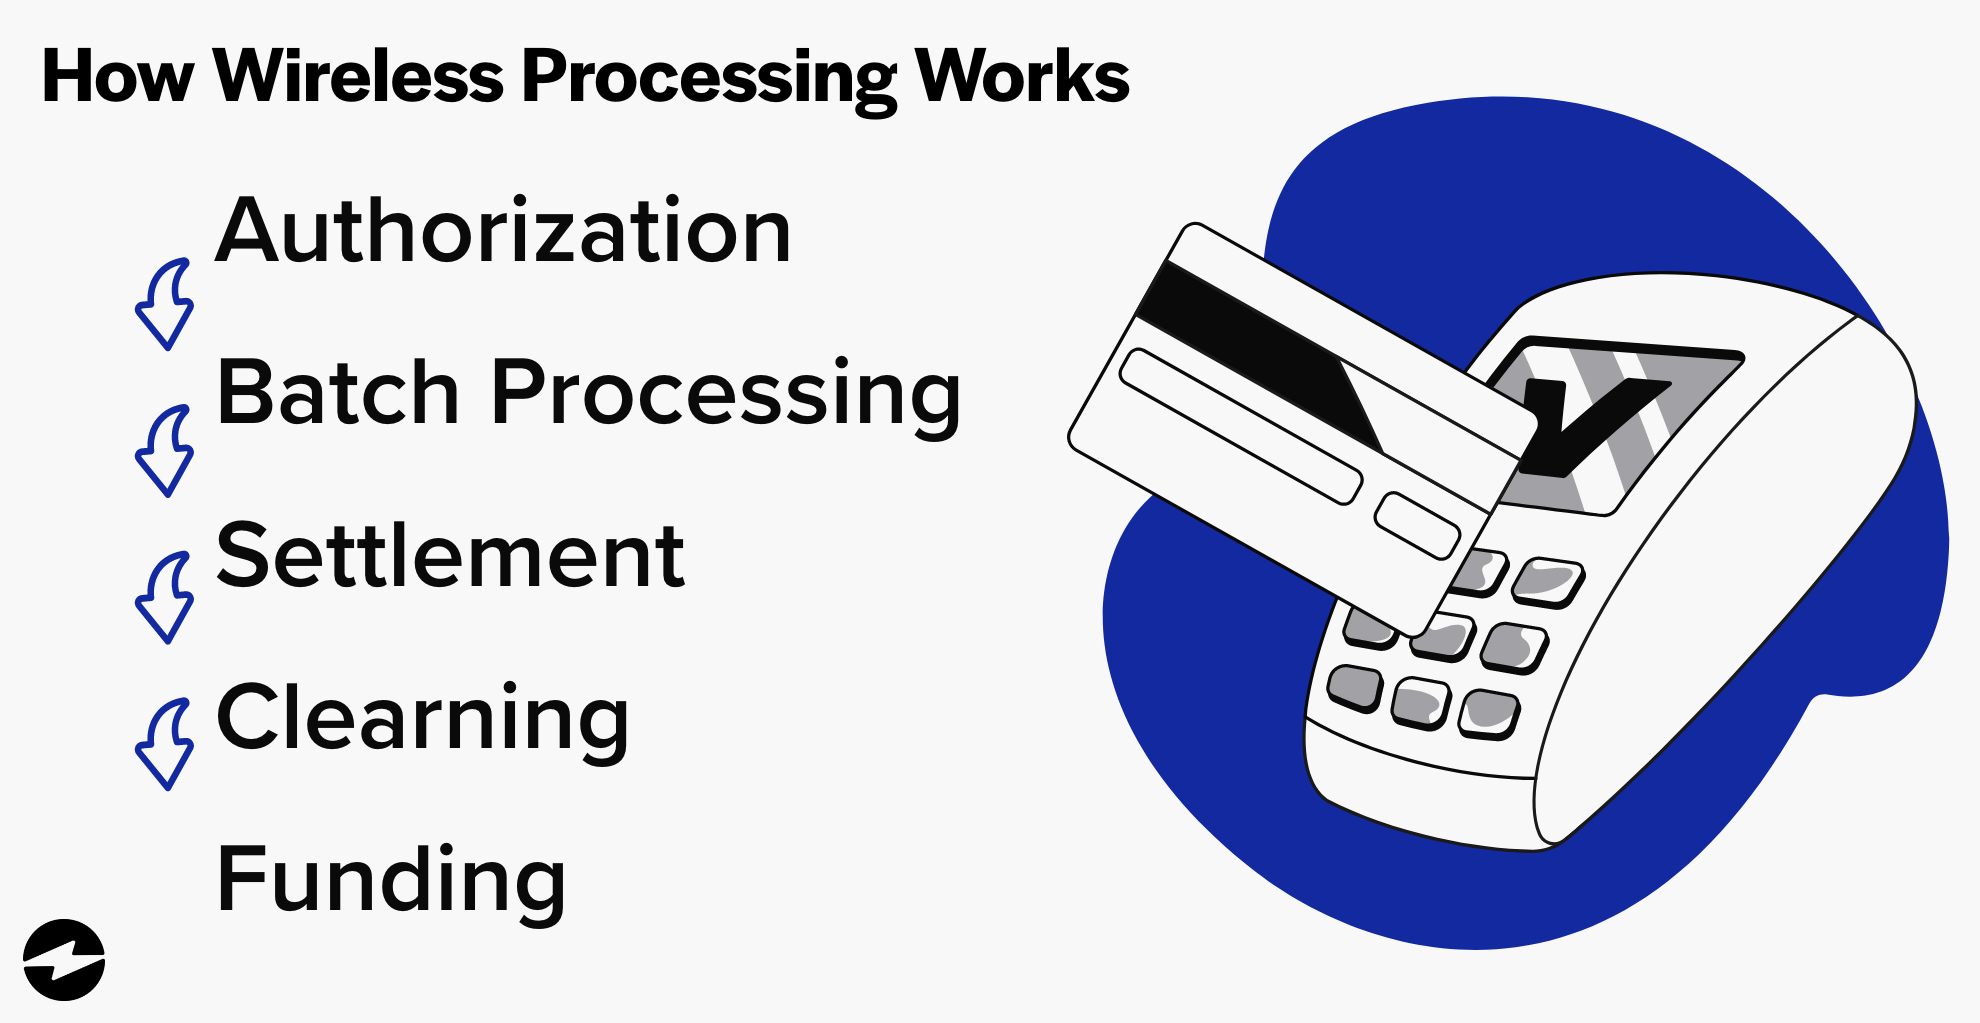 How Wireless Processing Works